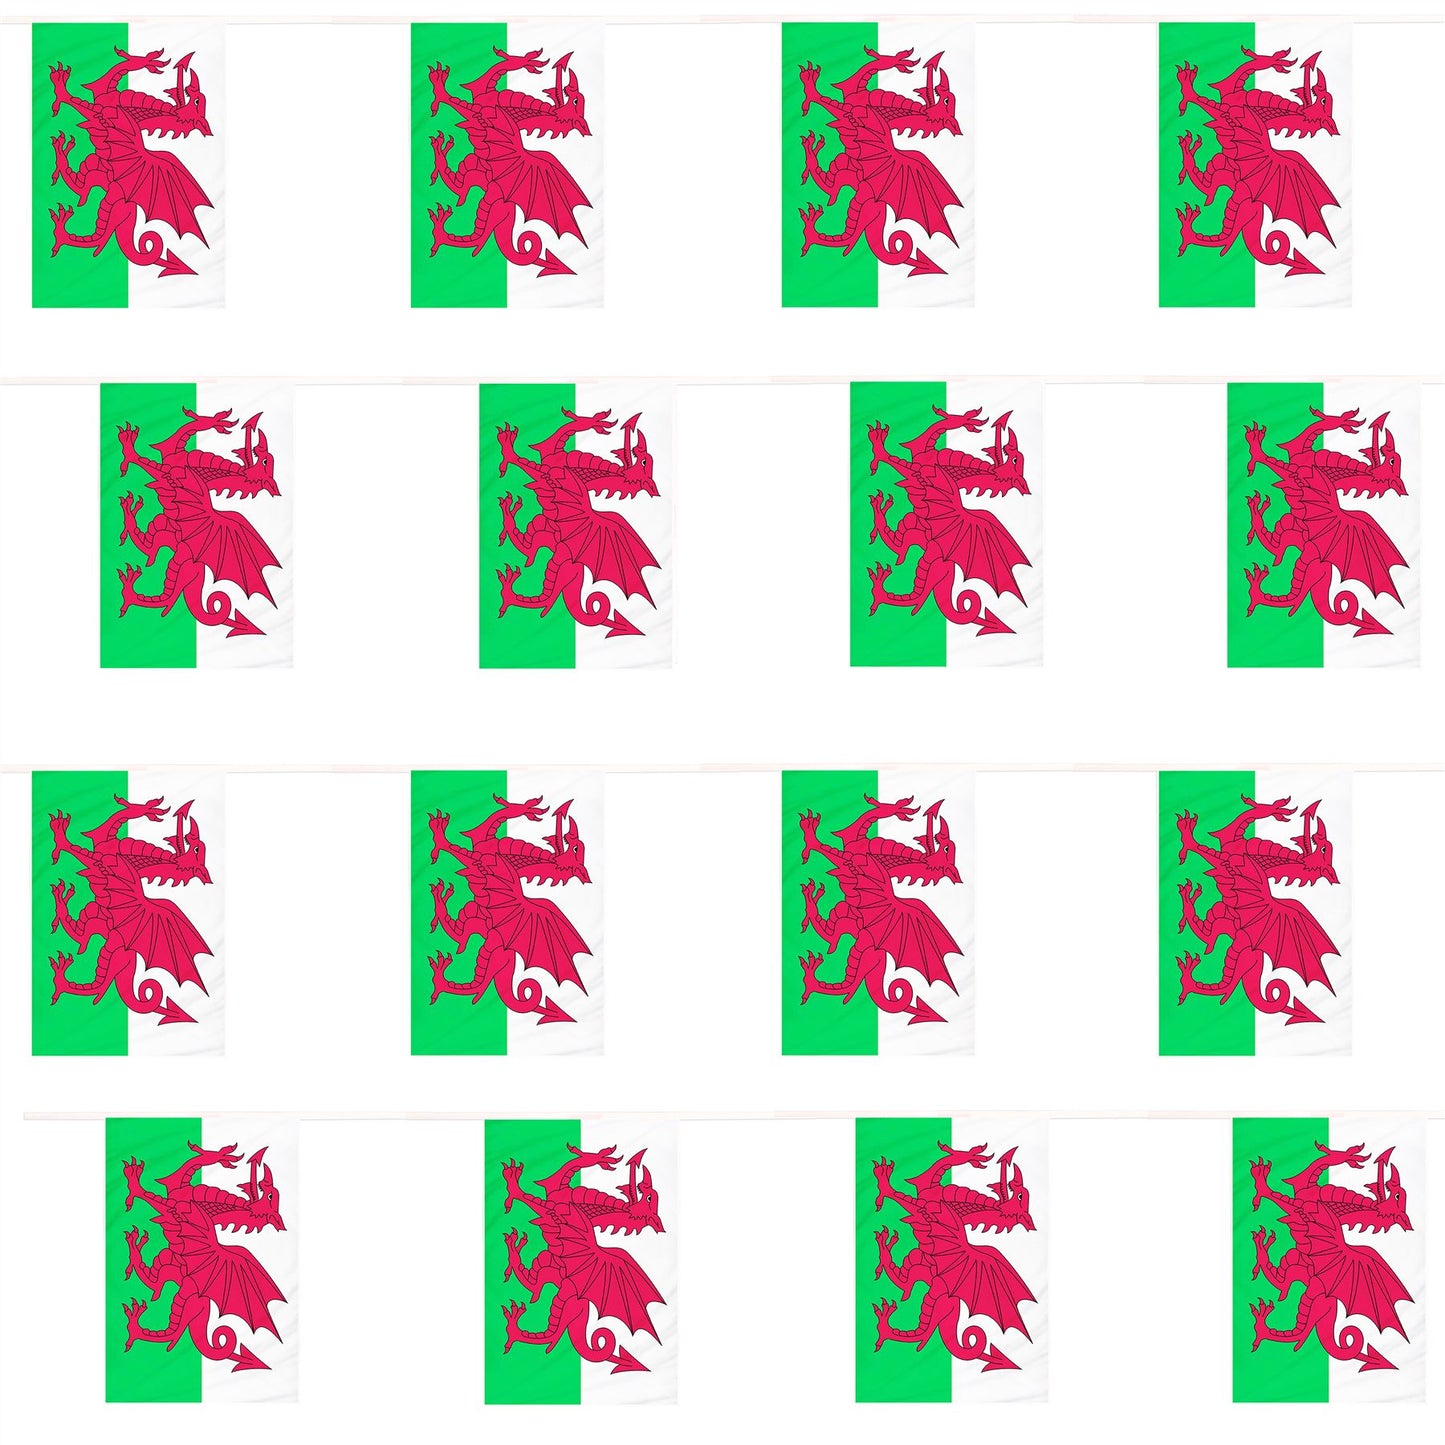 Wales Welsh Cymru 10 Metre Polyester Bunting with 24 Flags